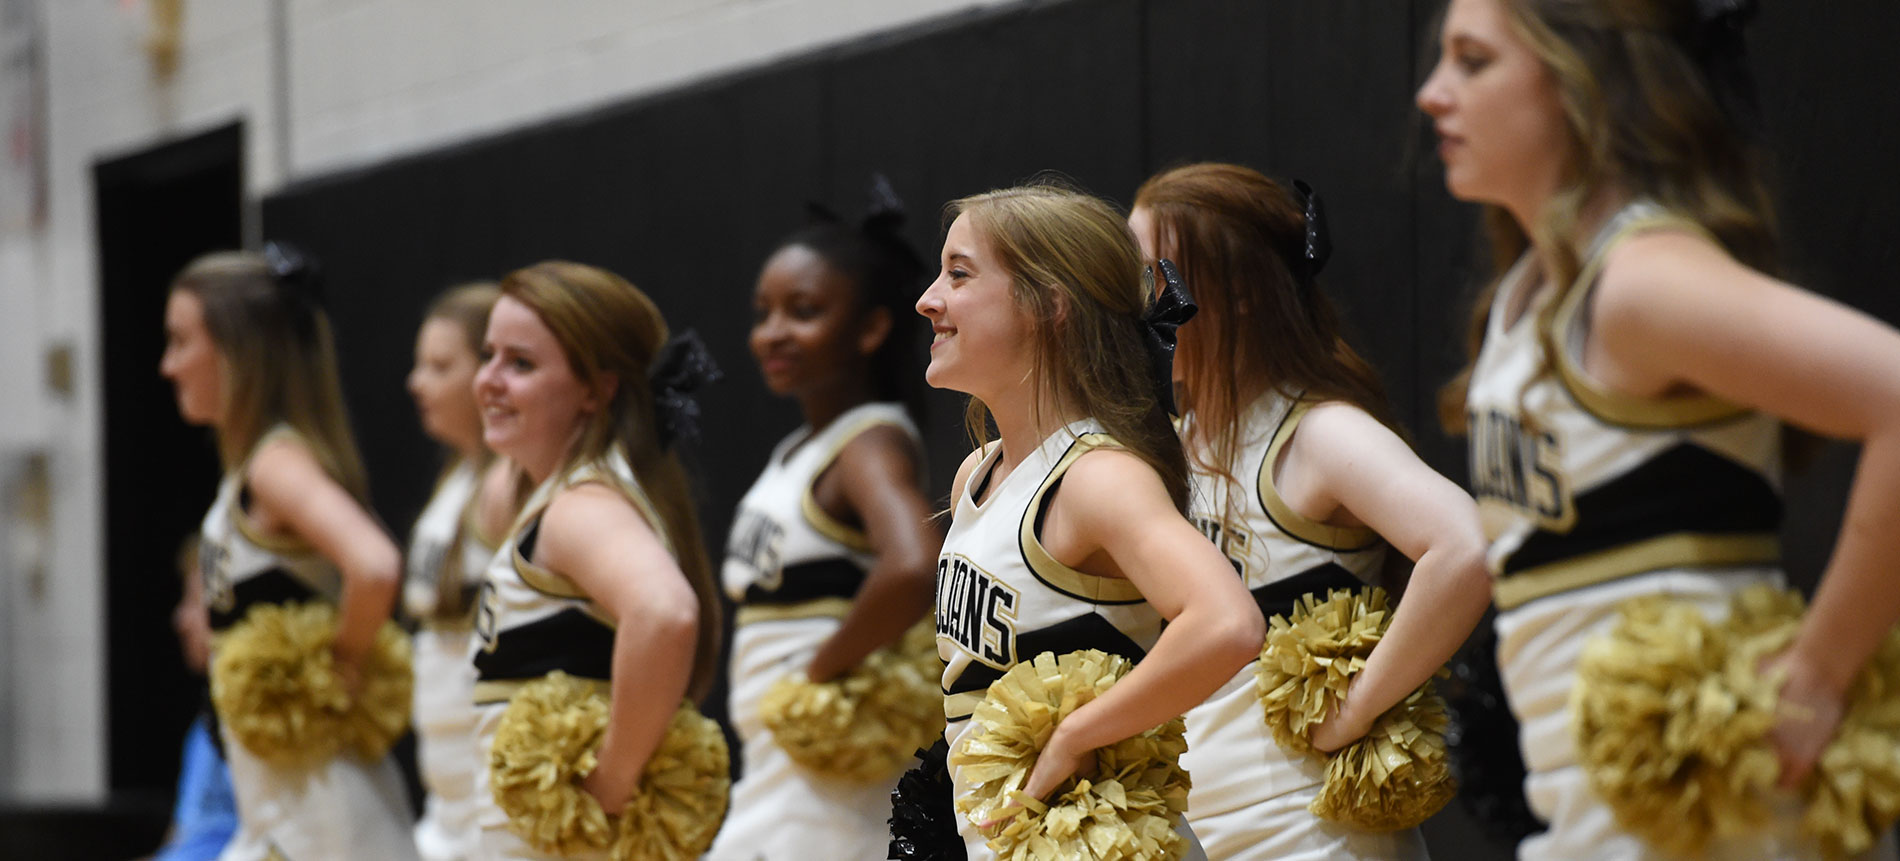 Cheerleading Tryouts Dates Announced for 2019-20 Squad